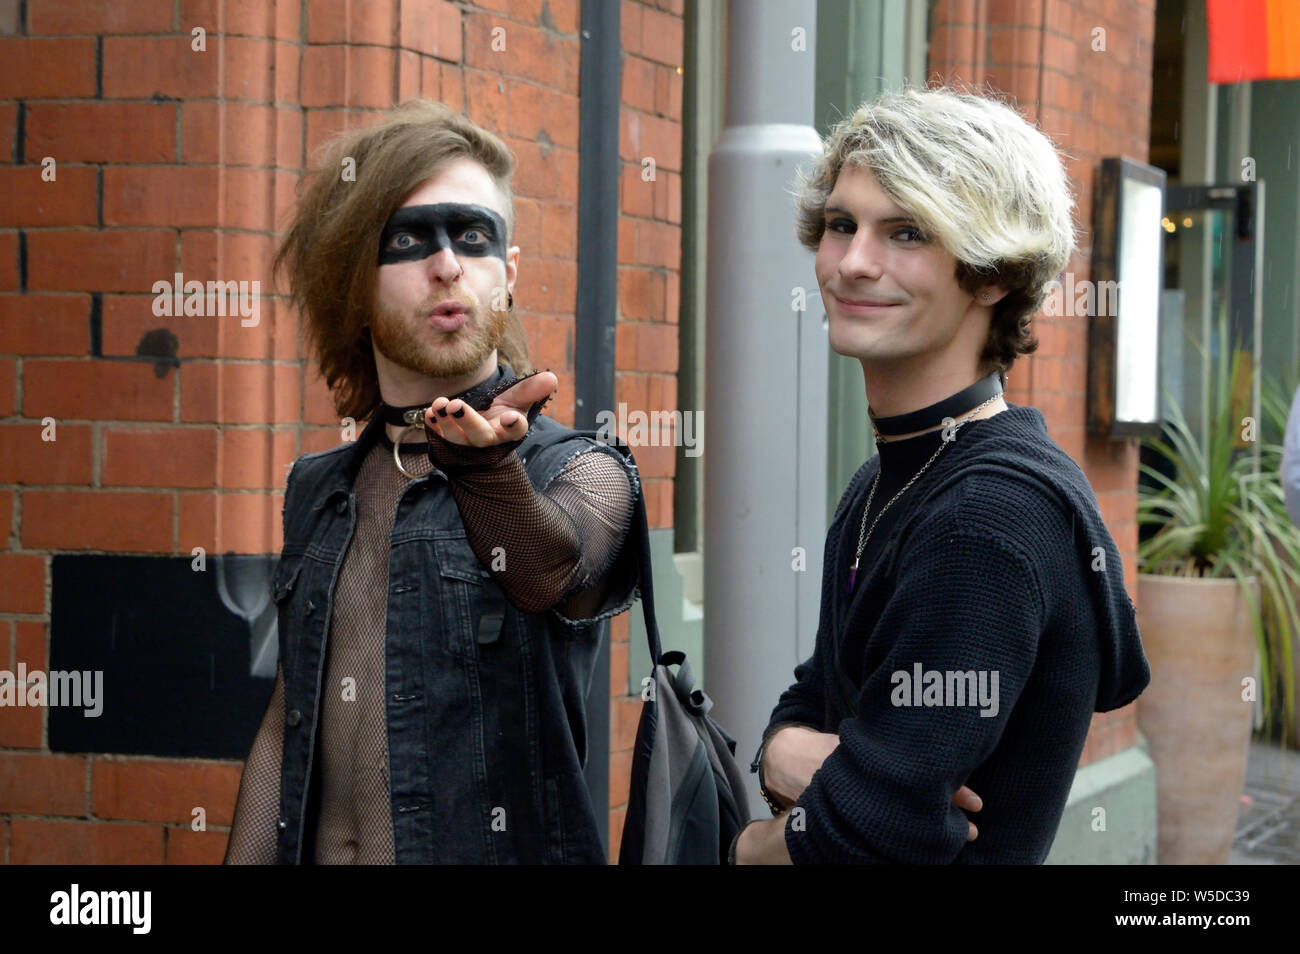 Two guys, in black, with unusual hair styles, & eye make up. Stock Photo